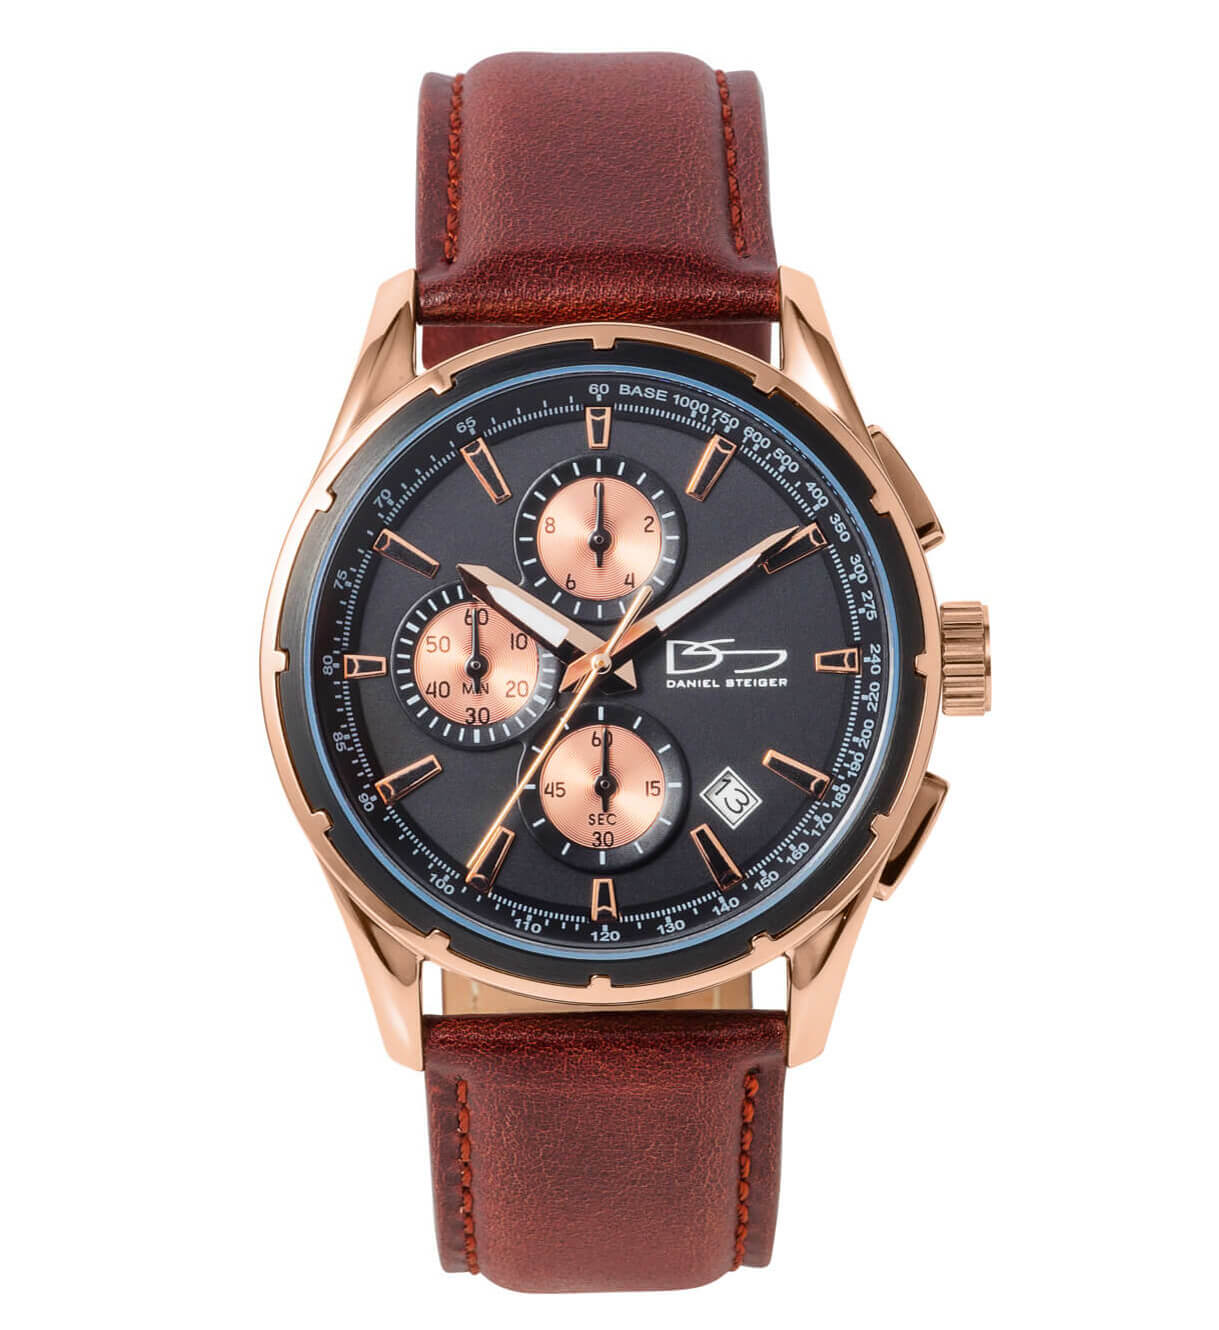 Elevation Leather Men's Watch